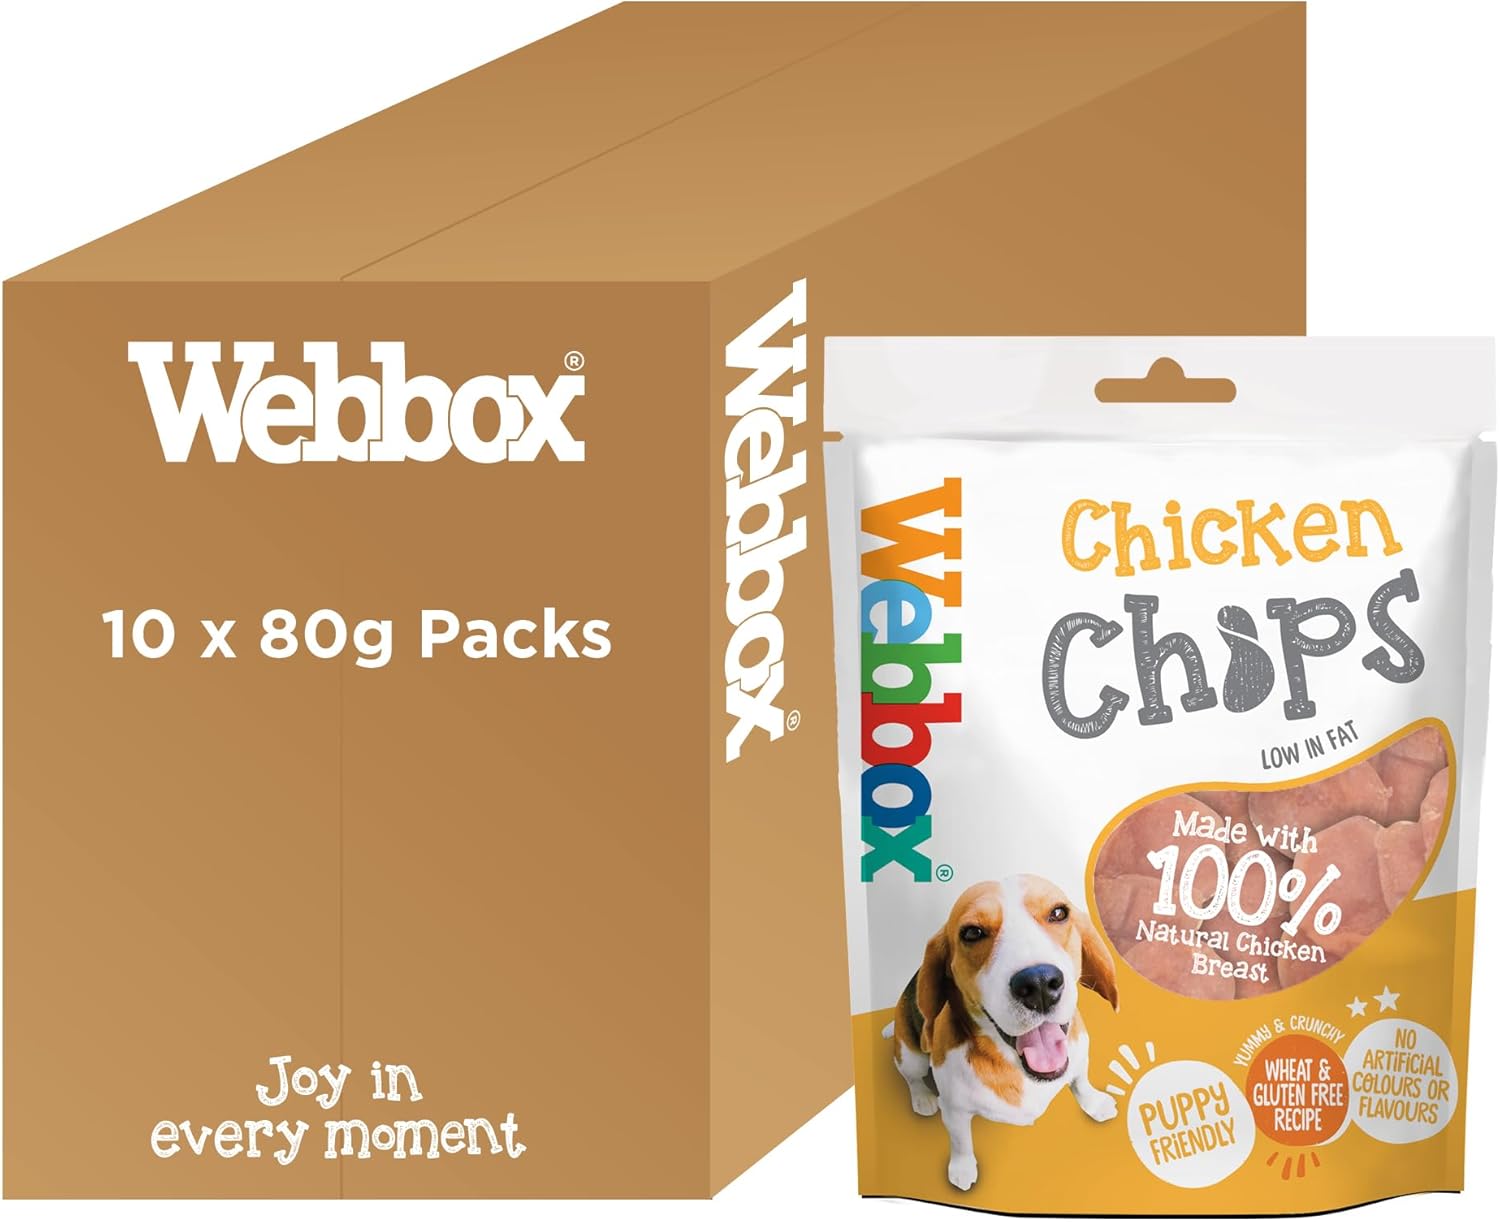 Webbox Chicken Chips Dog Treats - Made with 100 Percent Natural Chicken Breast, Puppy Friendly, Low Fat, Wheat and Gluten Free (10 x 80g Packs)